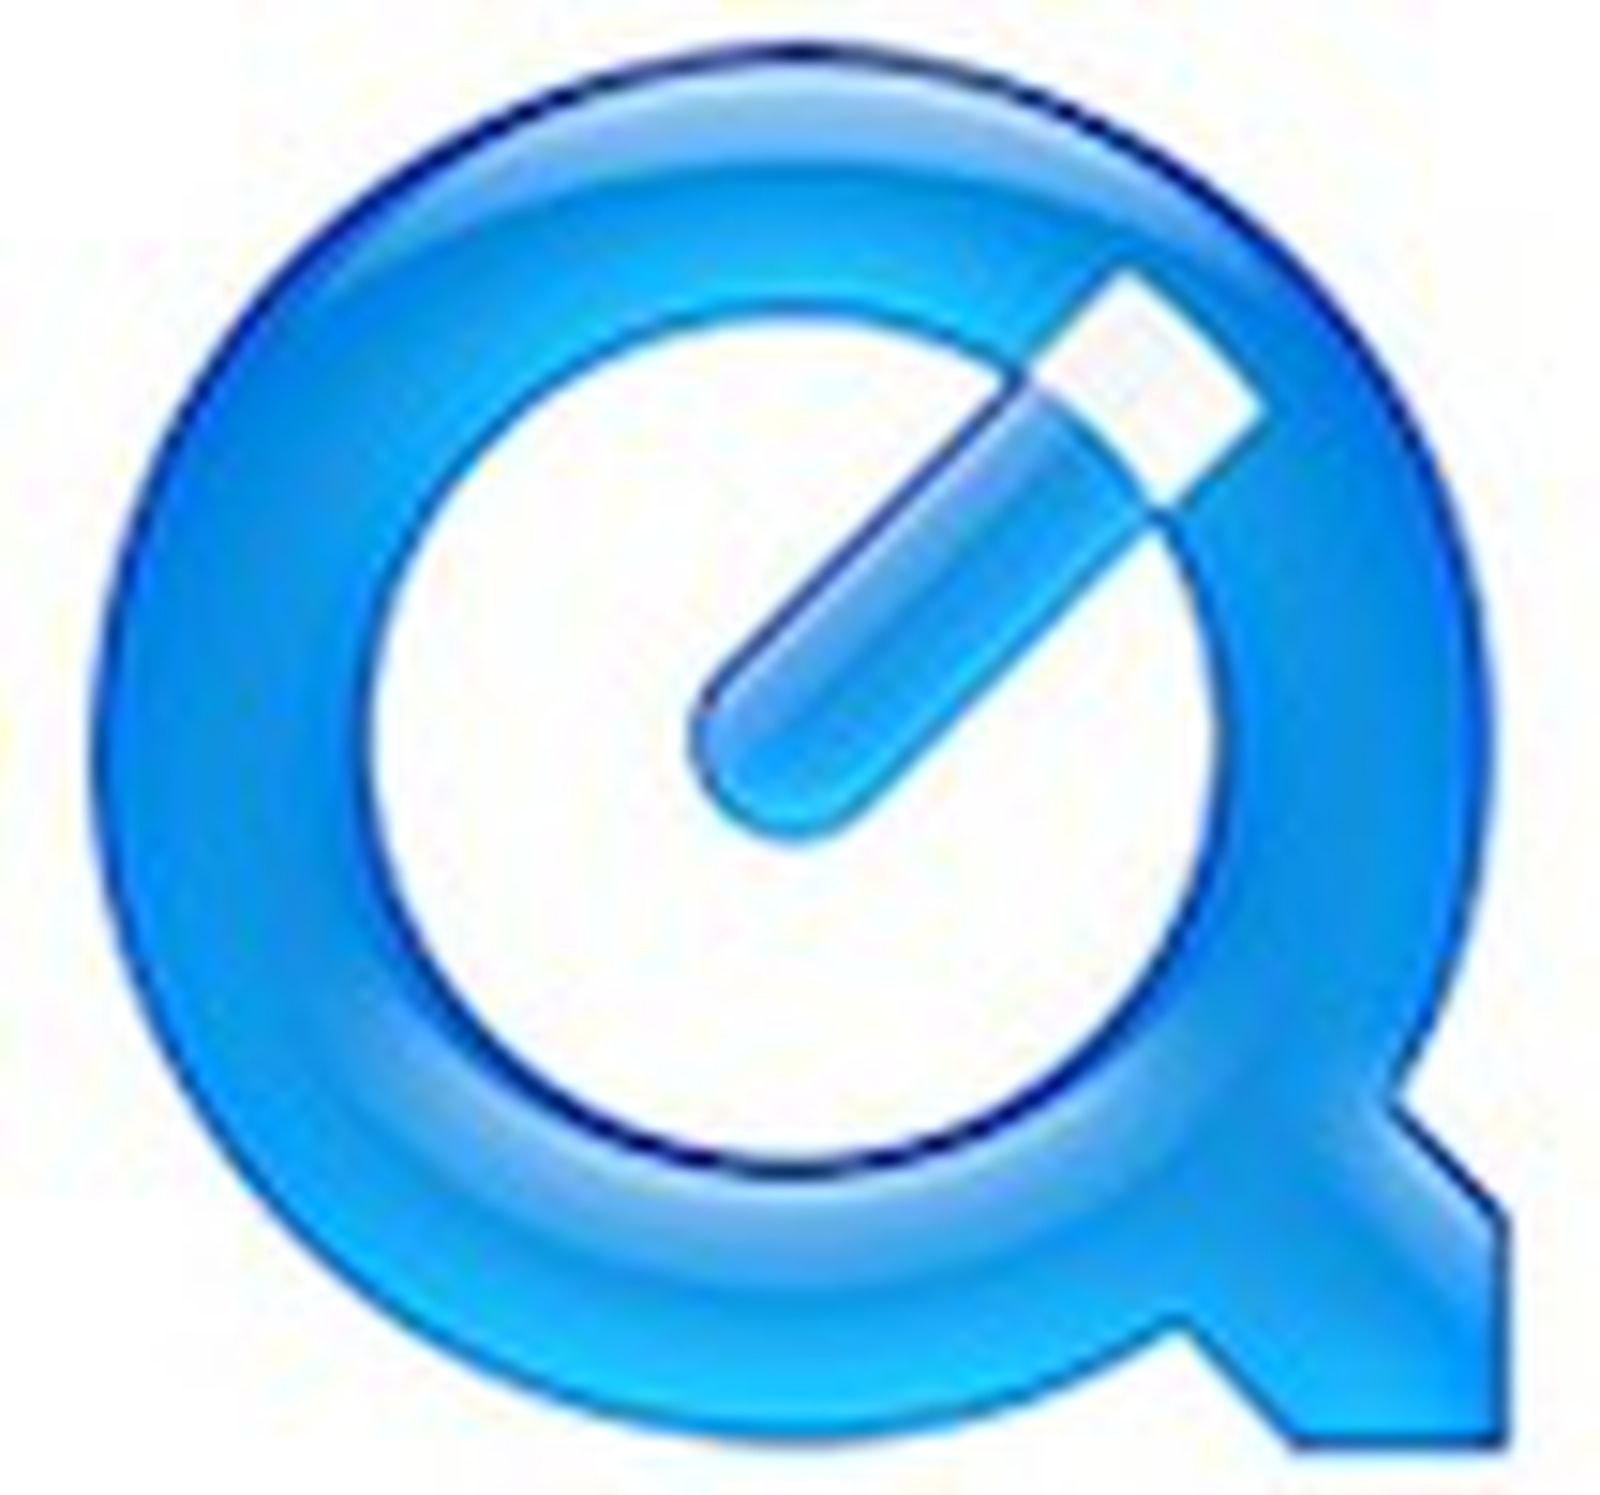 quicktime 7.7 for windows